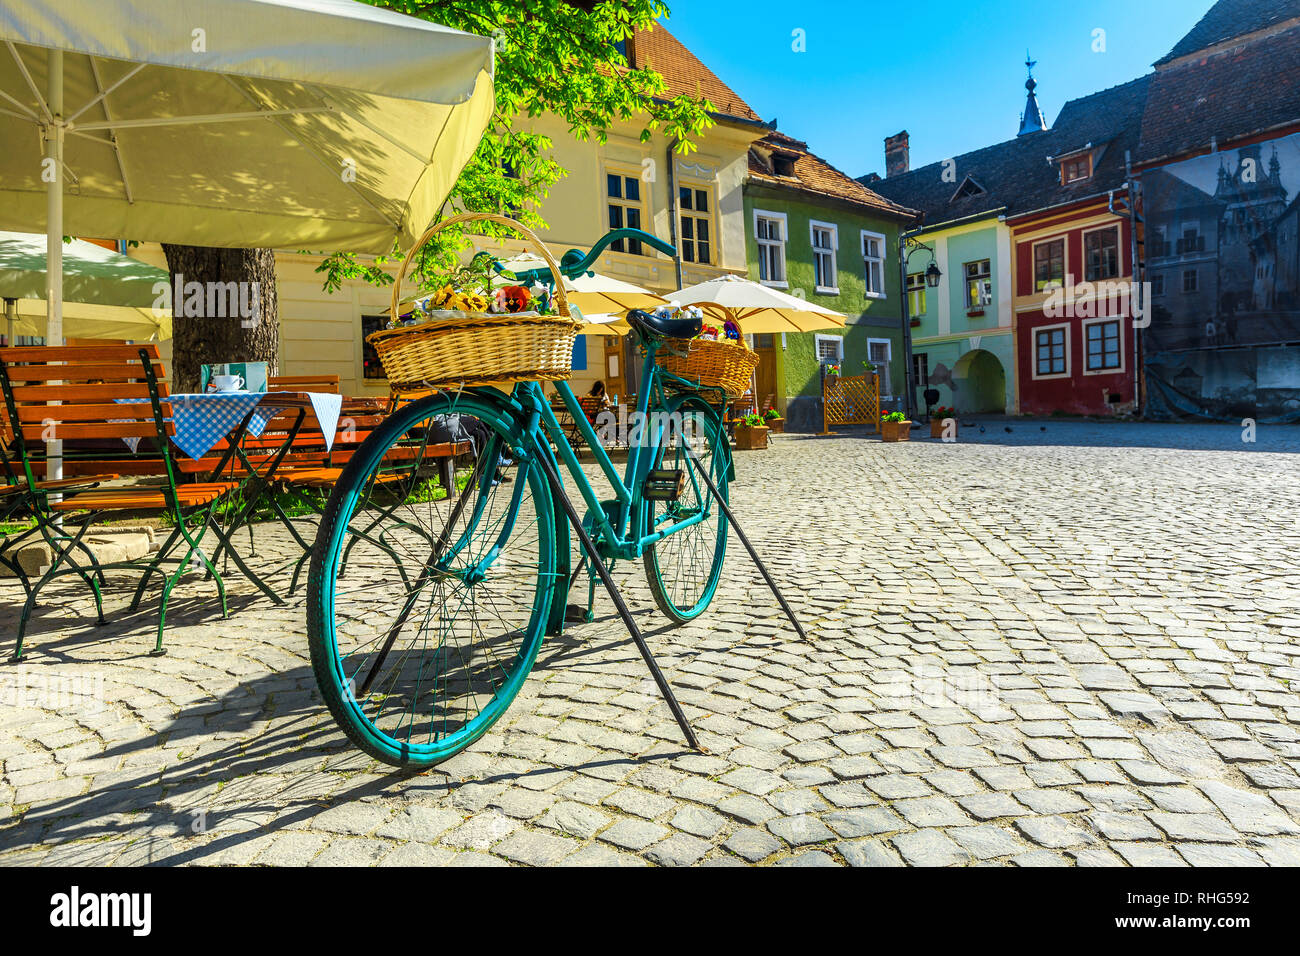 Fantastic travel destination, recreation and resting place with street cafe bar. Traditional colorful buildings and spectacular promenade, Sighisoara, Stock Photo